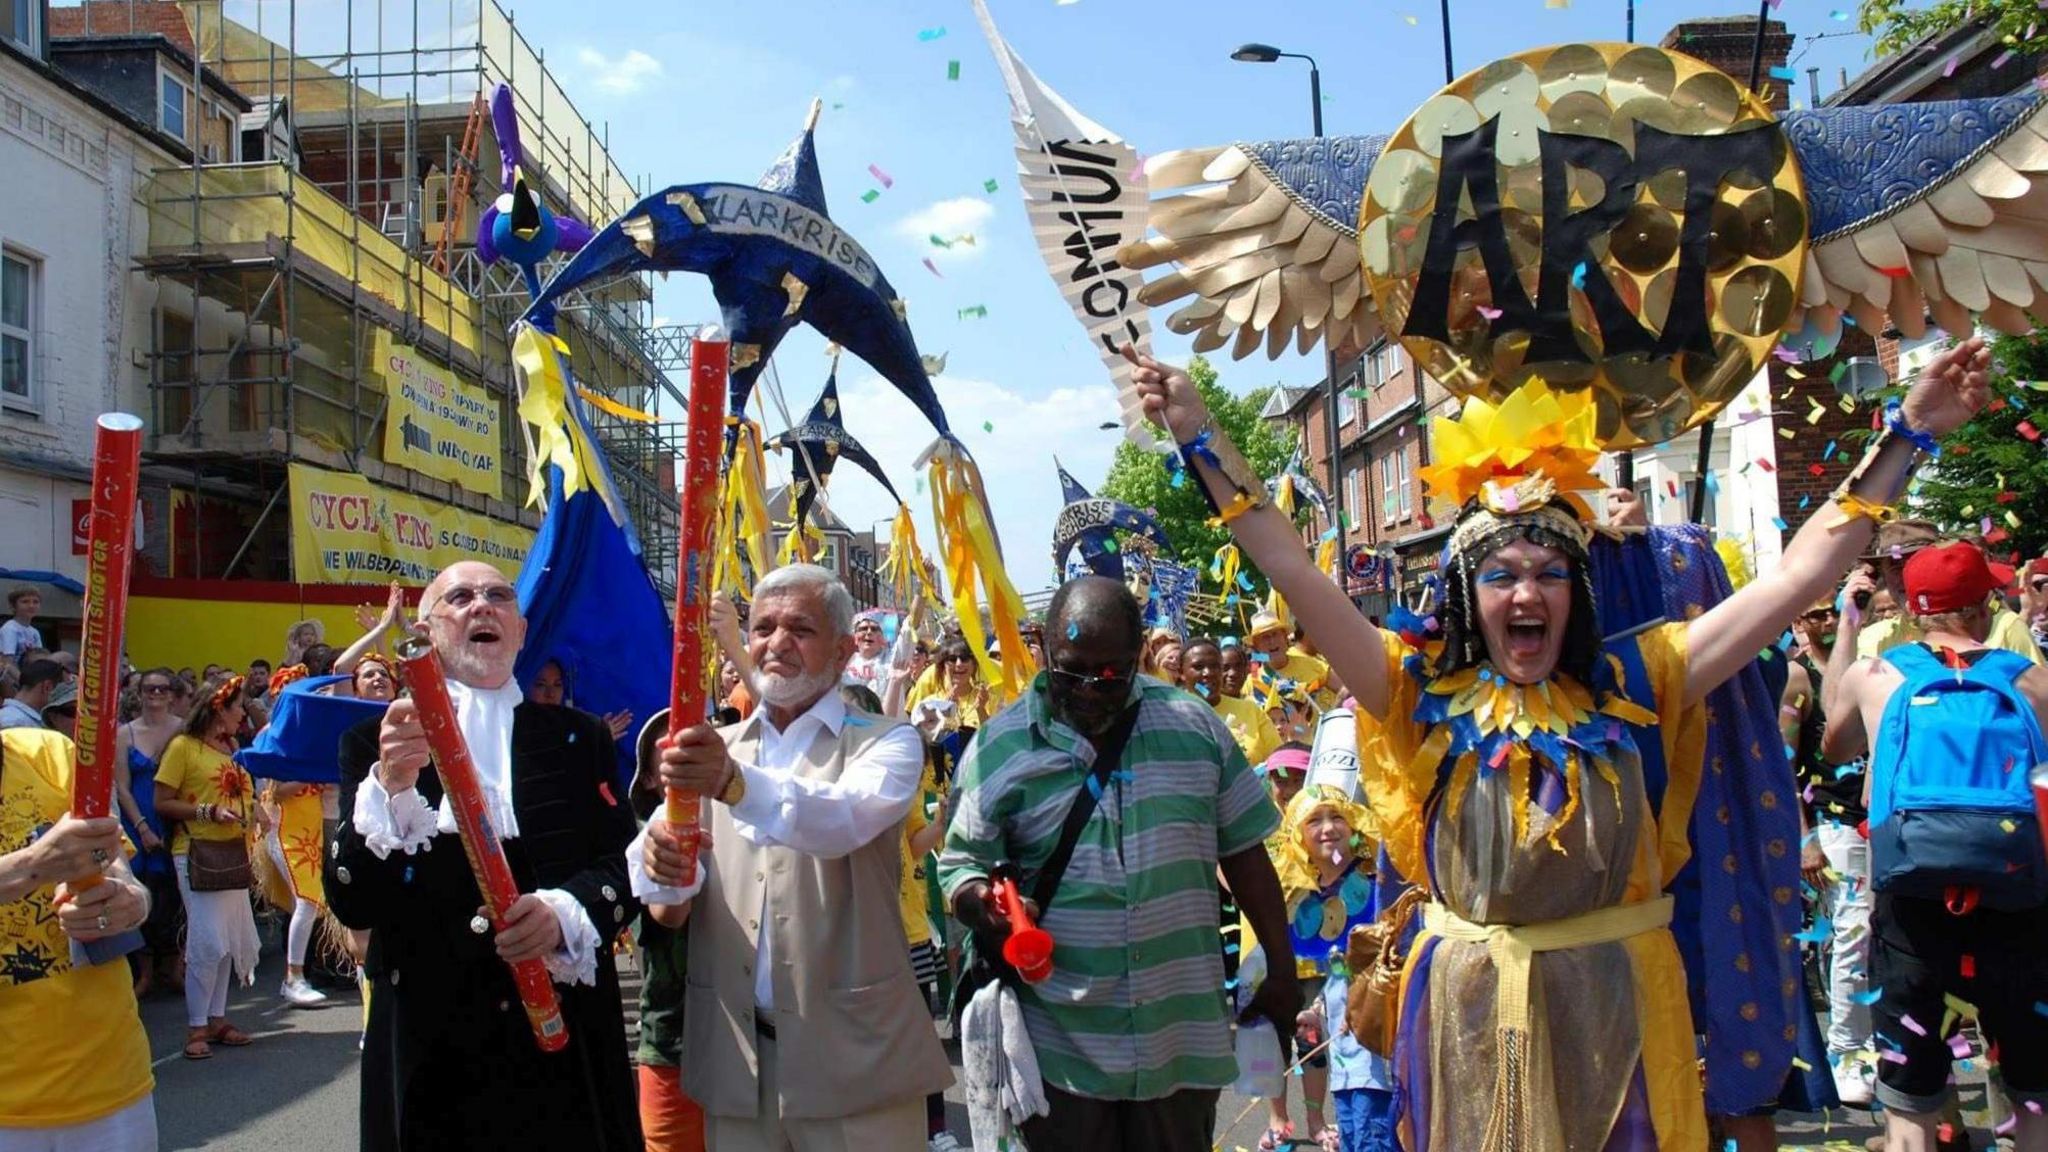 Carnival goers dressed in yellow and blue with sequins and sparkles on their costumes, throwing confetti into the air